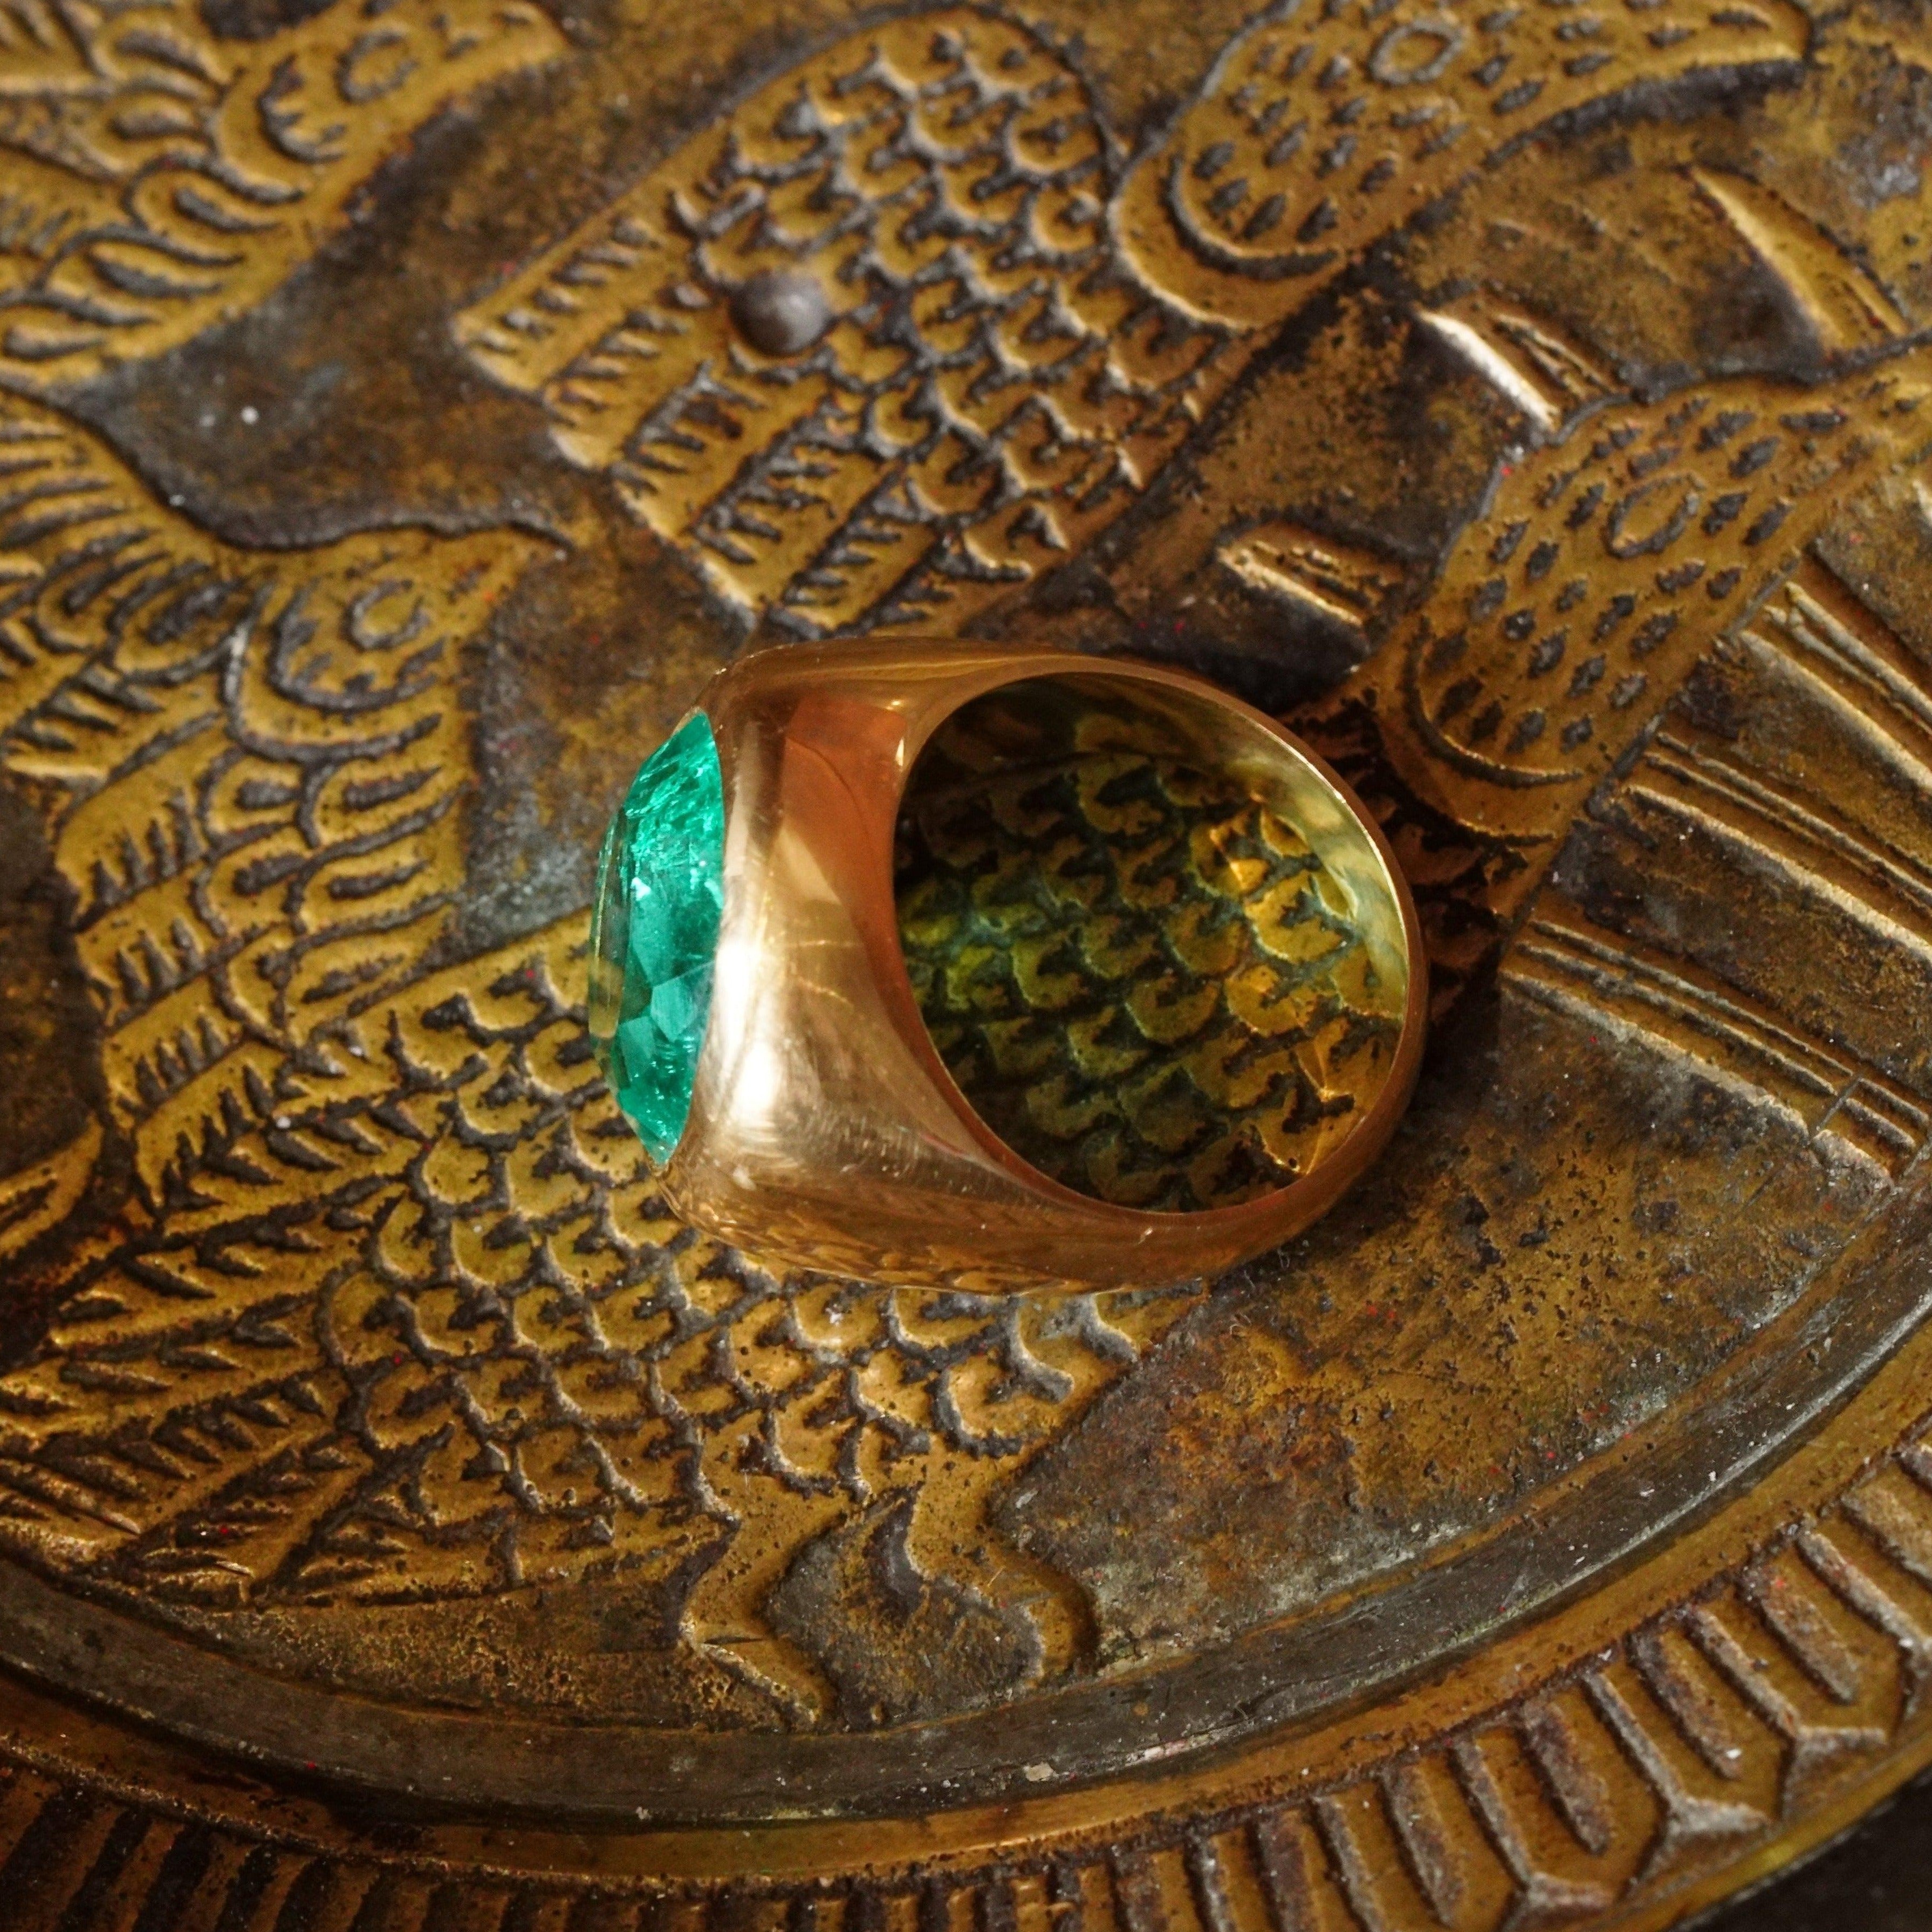 Chivor's Tears: 20K Gold Gypsy Set Ring with Rare Round 7.48 CT Colombian Emerald from Chivor Mine - Jogani